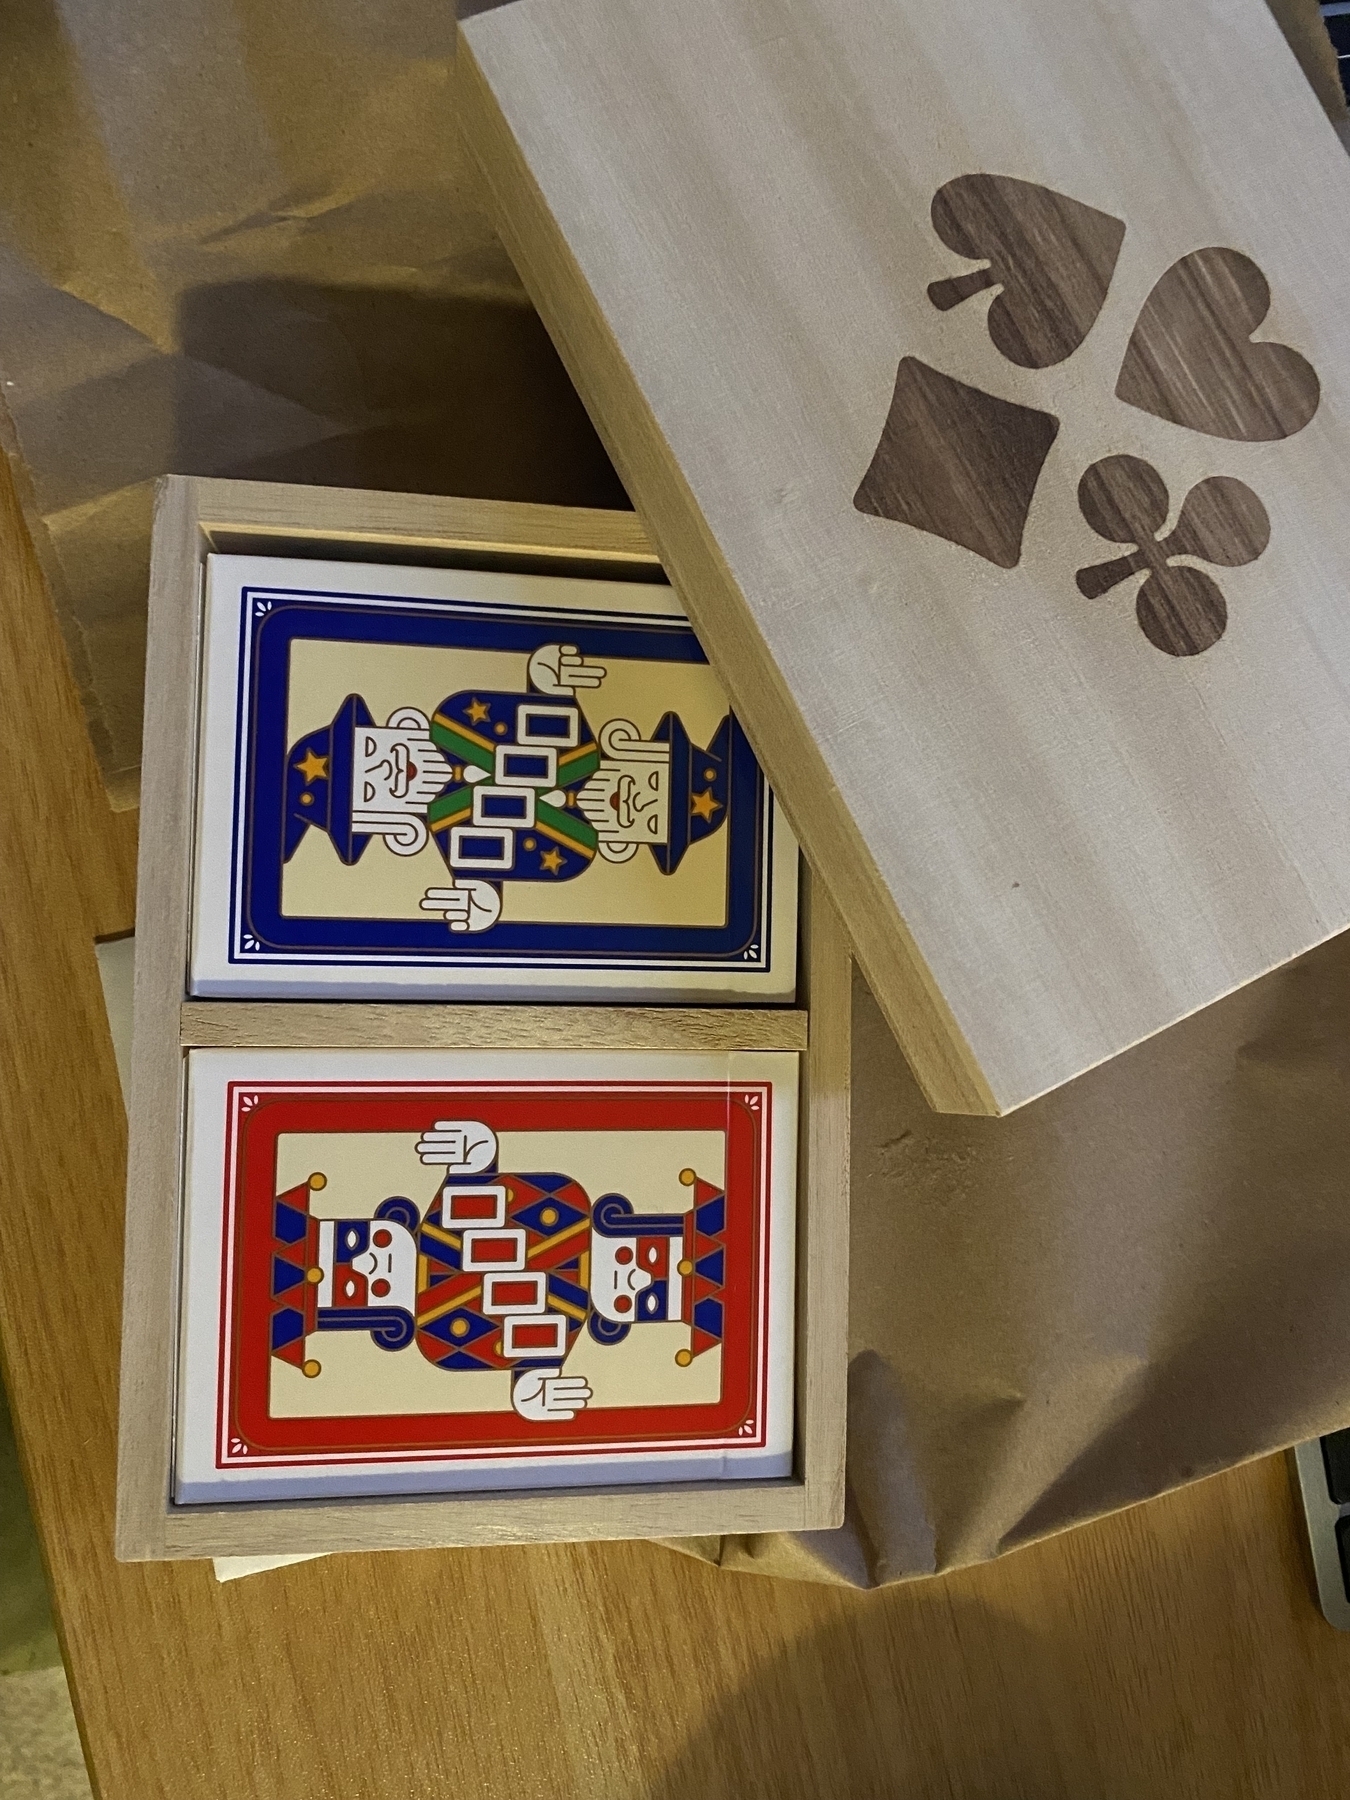 A picture of two playing card decks in their wooden box.